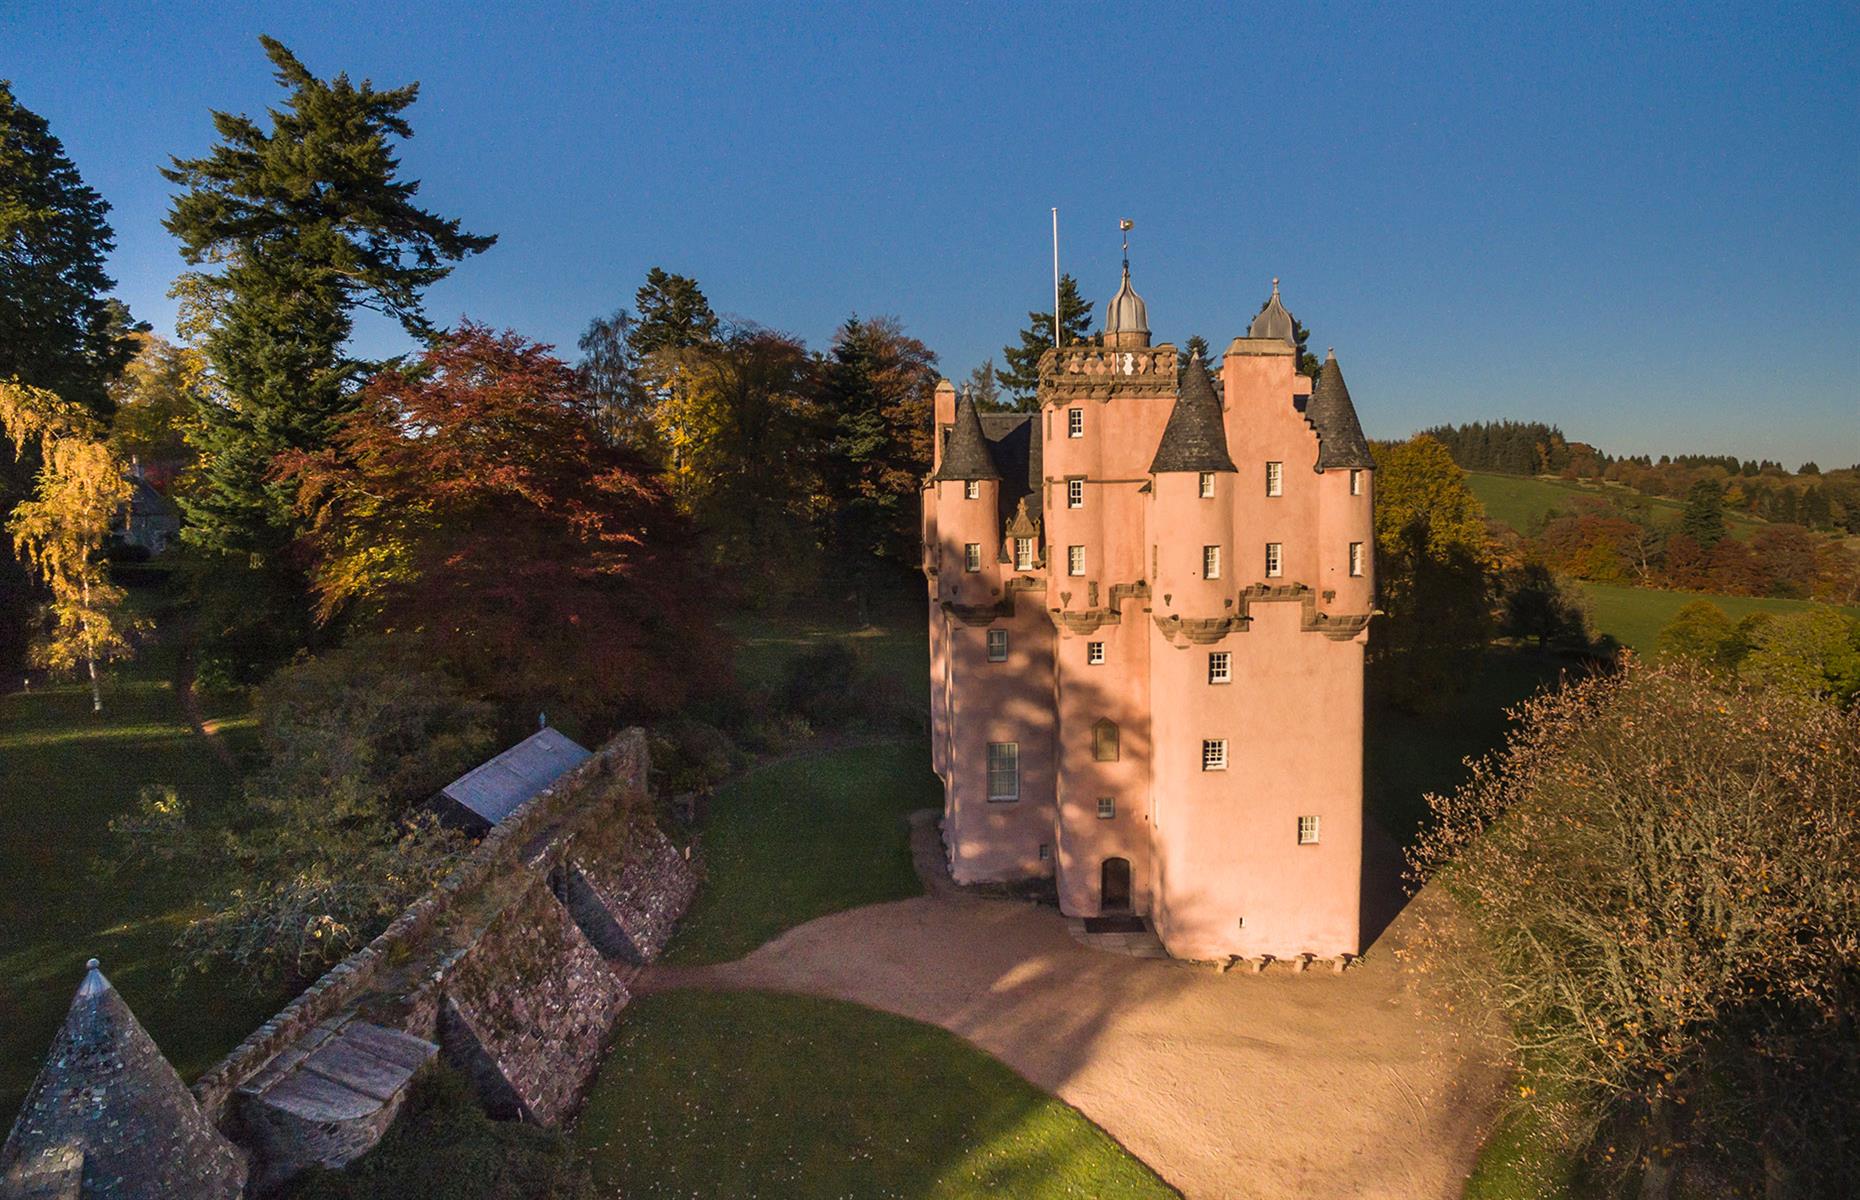 <p>This pretty-in-pink <a href="https://www.visitscotland.com/info/see-do/craigievar-castle-p248301">castle</a> is like the realisation of a Disney fantasy. Built in the Scottish Baronial style around 1576, it is said that Craigievar's towered fortress with its numerous turrets, provided some inspiration for Walt Disney’s Cinderella Castle (although this is hotly disputed with Neuschwanstein Castle in Germany). It certainly looks the part, and remarkably the exterior or the property remains virtually unchanged since it was completed in 1626.</p>